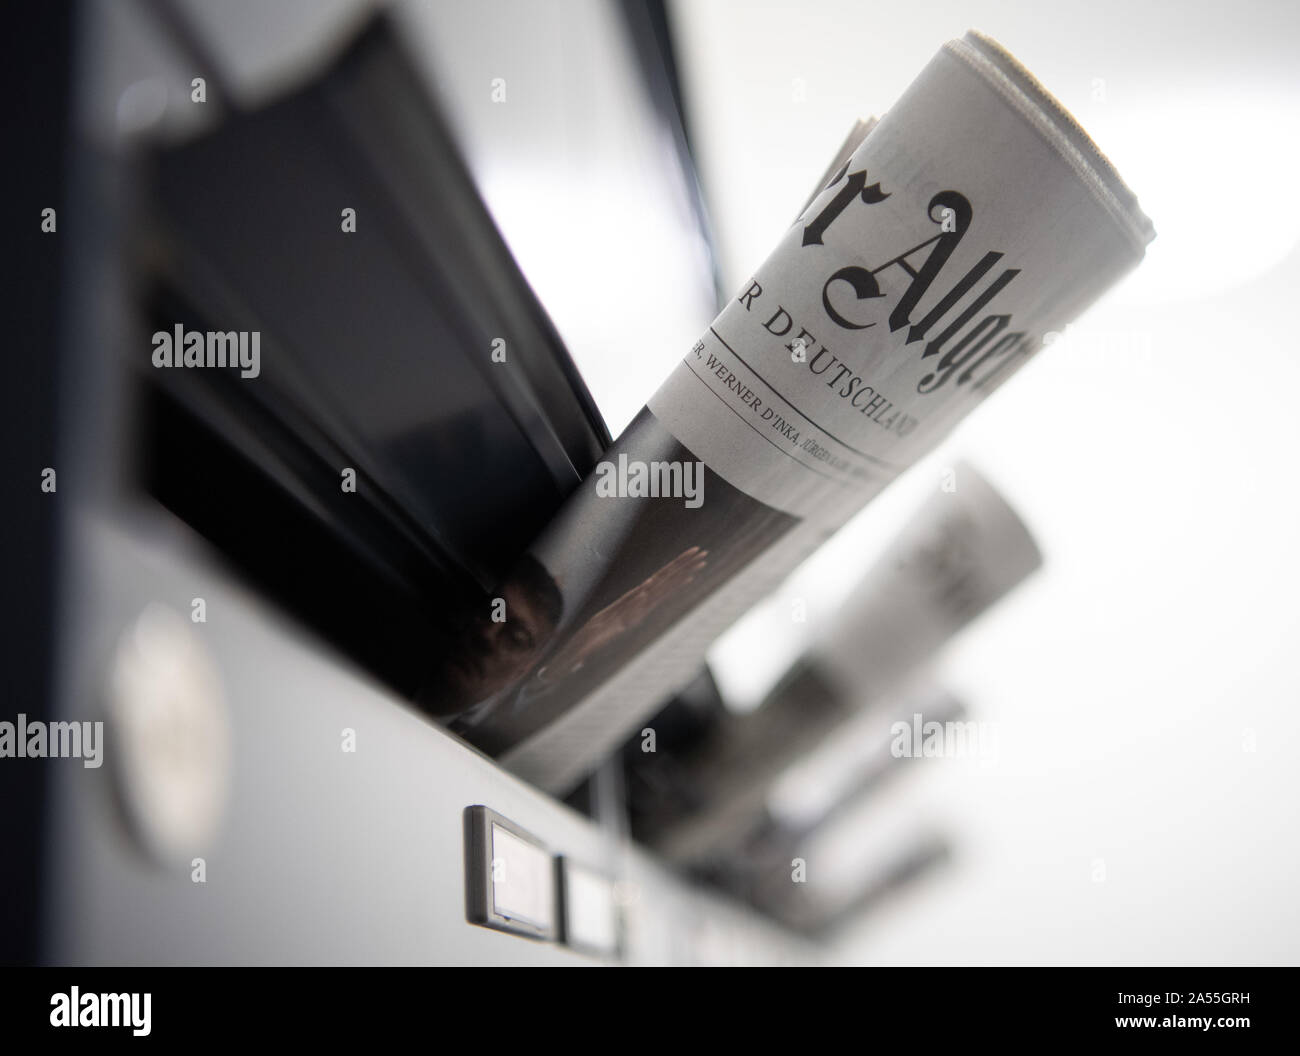 Berlin, Germany. 17th Oct, 2019. The 'Frankfurter Allgemeine Zeitung' (FAZ) and other newspapers are stuck in letterboxes in an apartment building. Credit: Soeren Stache/dpa-Zentralbild/ZB/dpa/Alamy Live News Stock Photo